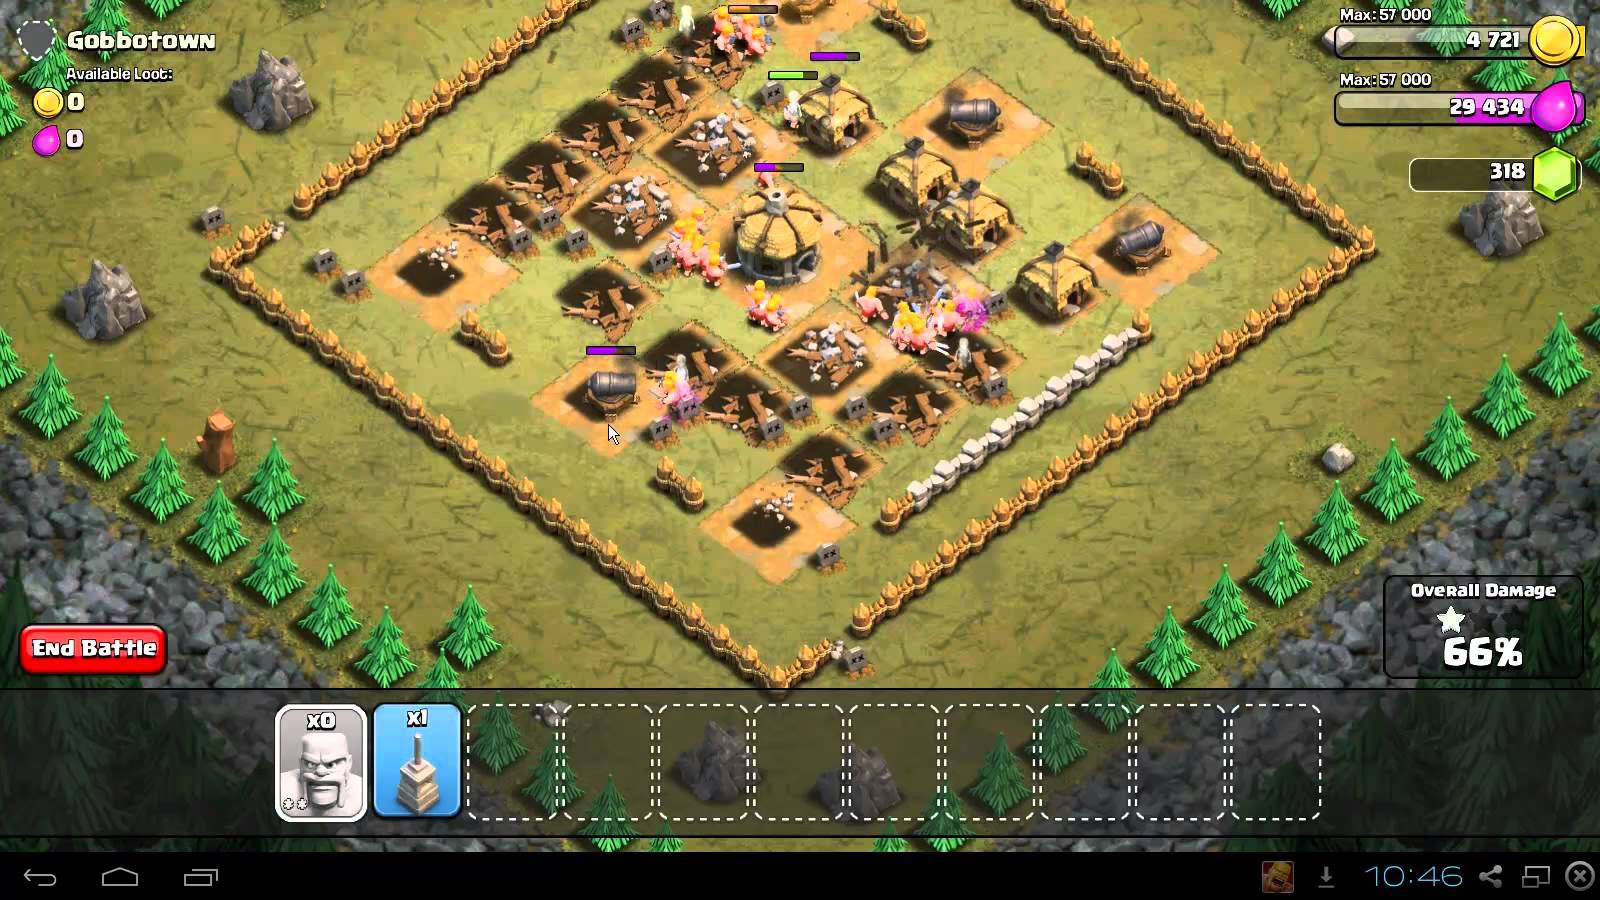 Clash of Clans Gobbotown Strategy Guide & 3 Star Walkthrough